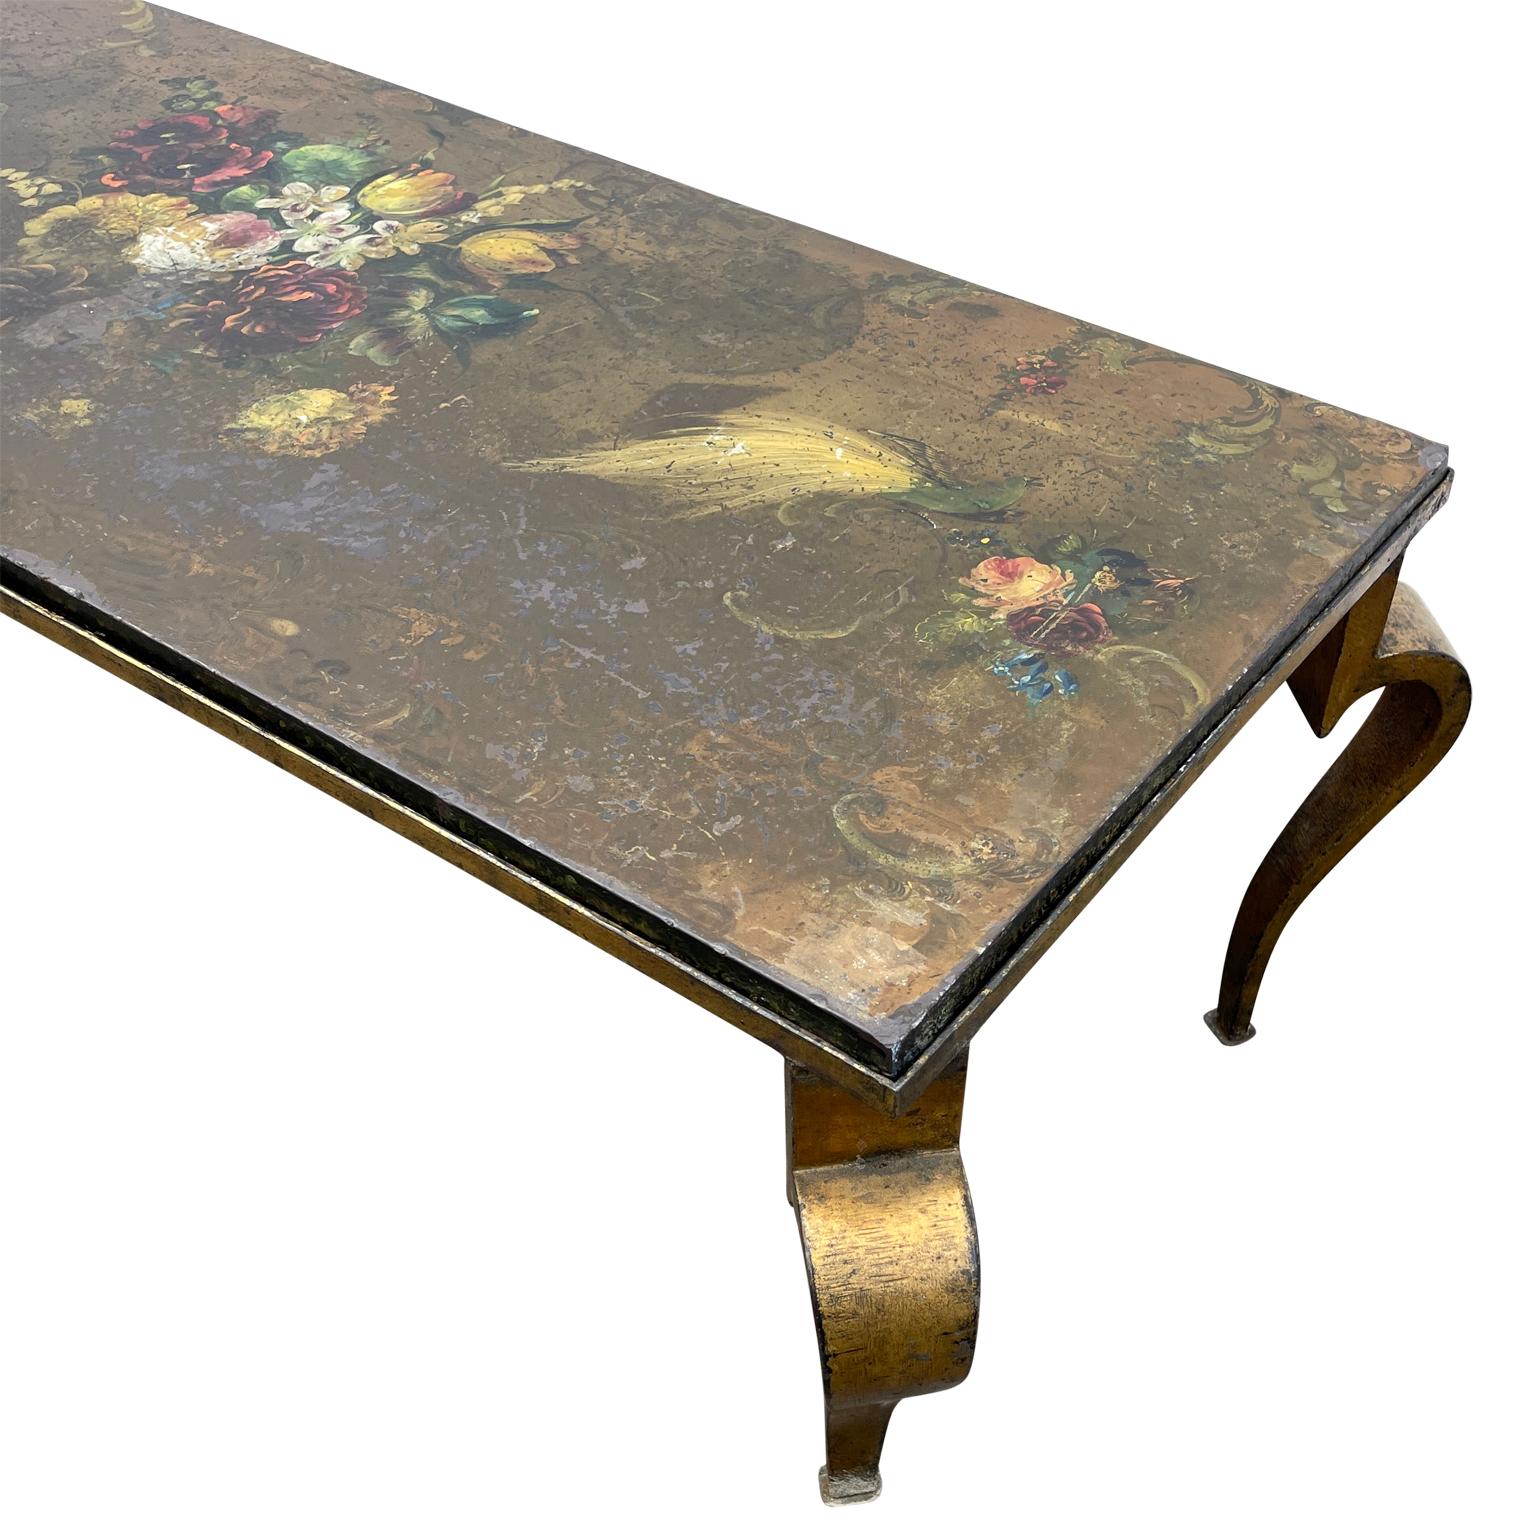 20th Century Vintage Italian Hand-painted Rectangular Cocktail Table, Circa 1950 For Sale